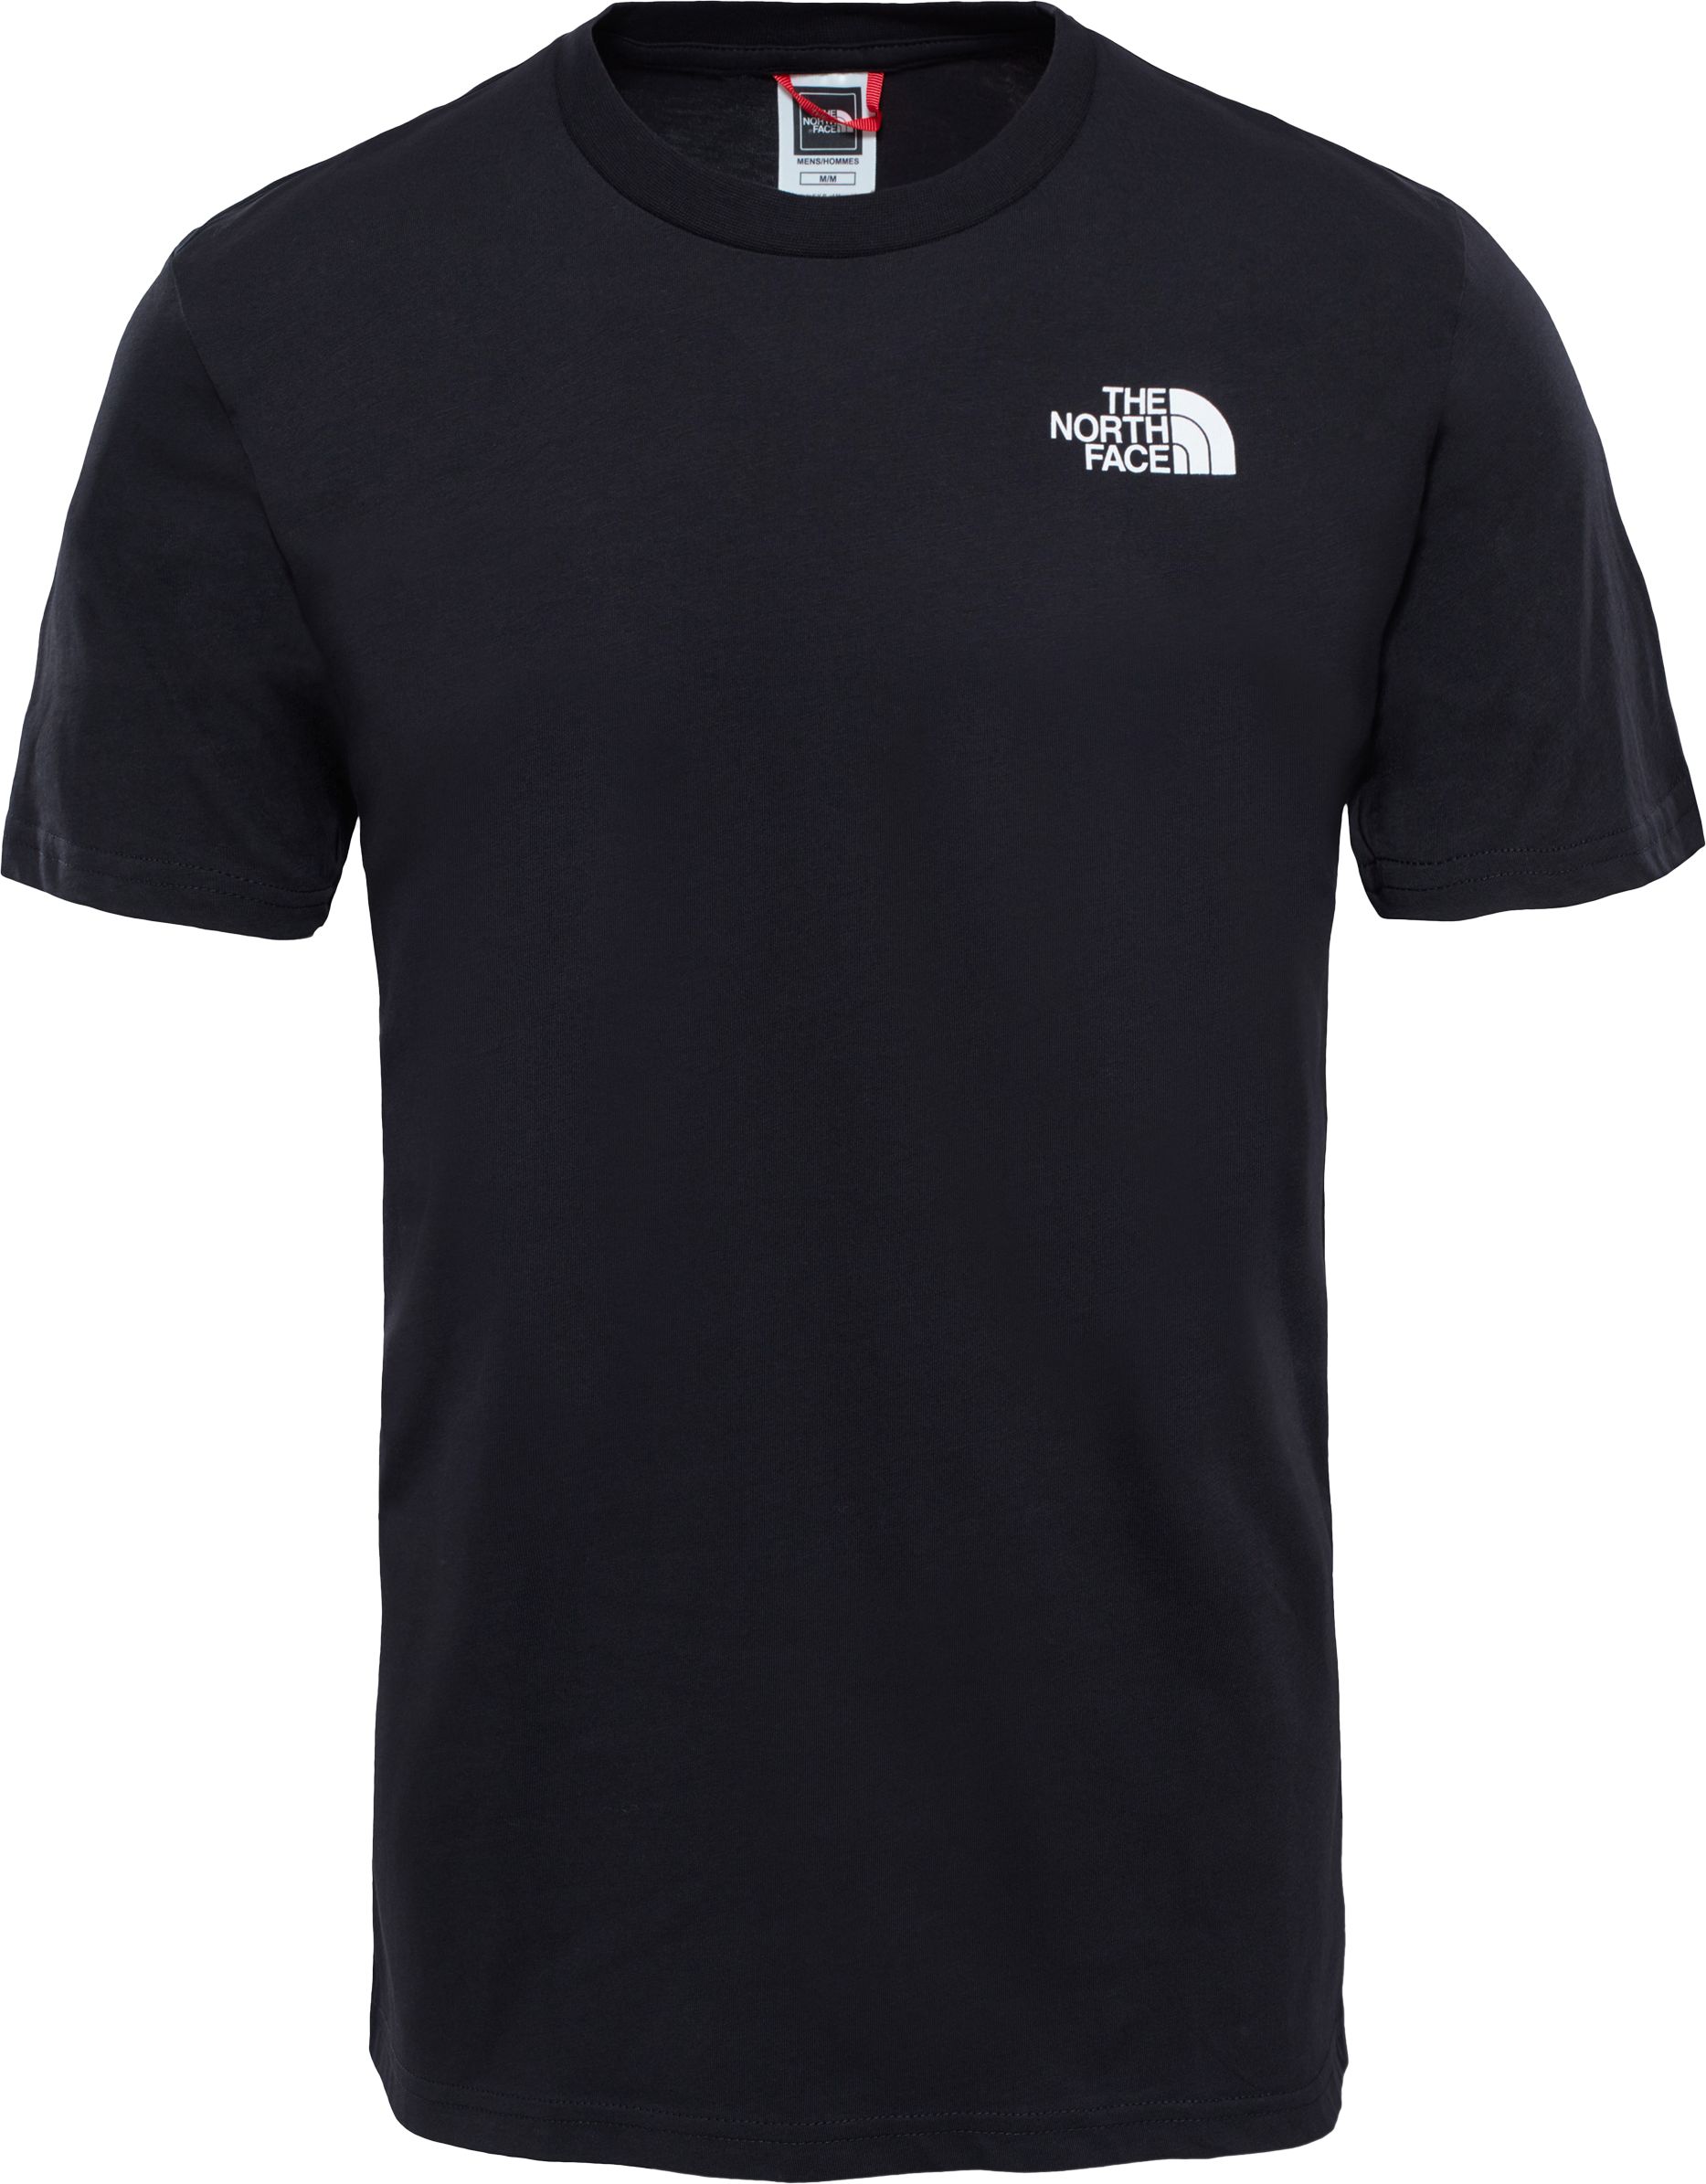 THE NORTH FACE, M S/S SIMPLE DOME TE